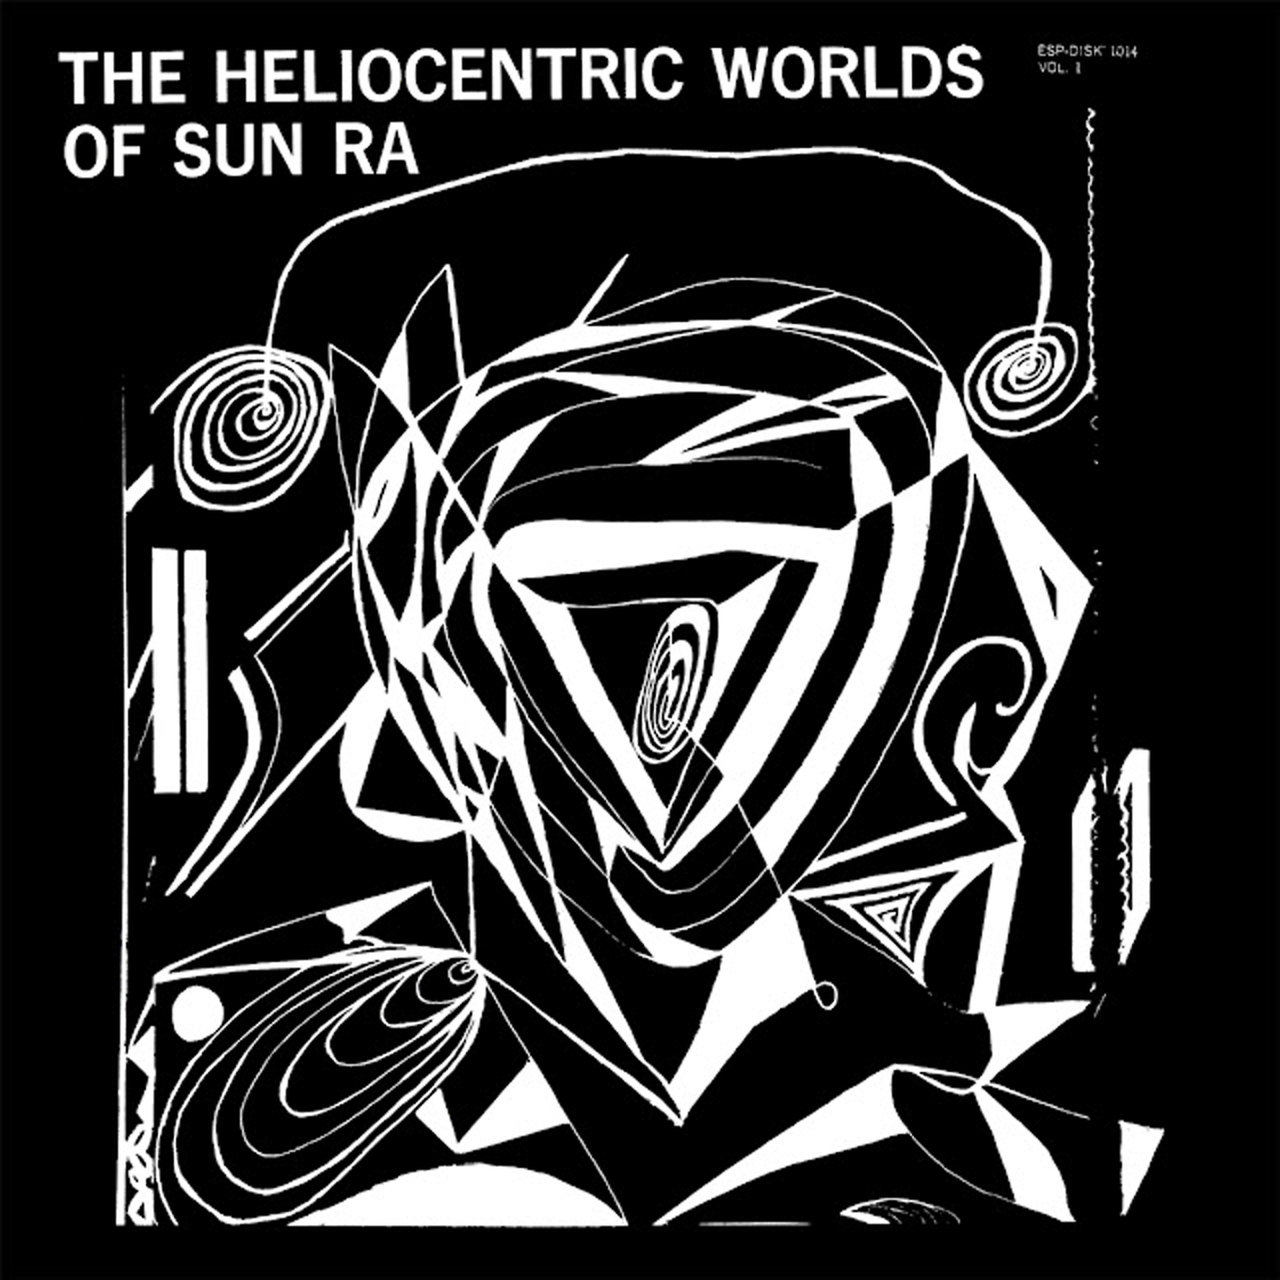 The Heliocentric Worlds of Sun Ra, Vol. 1 [1965]